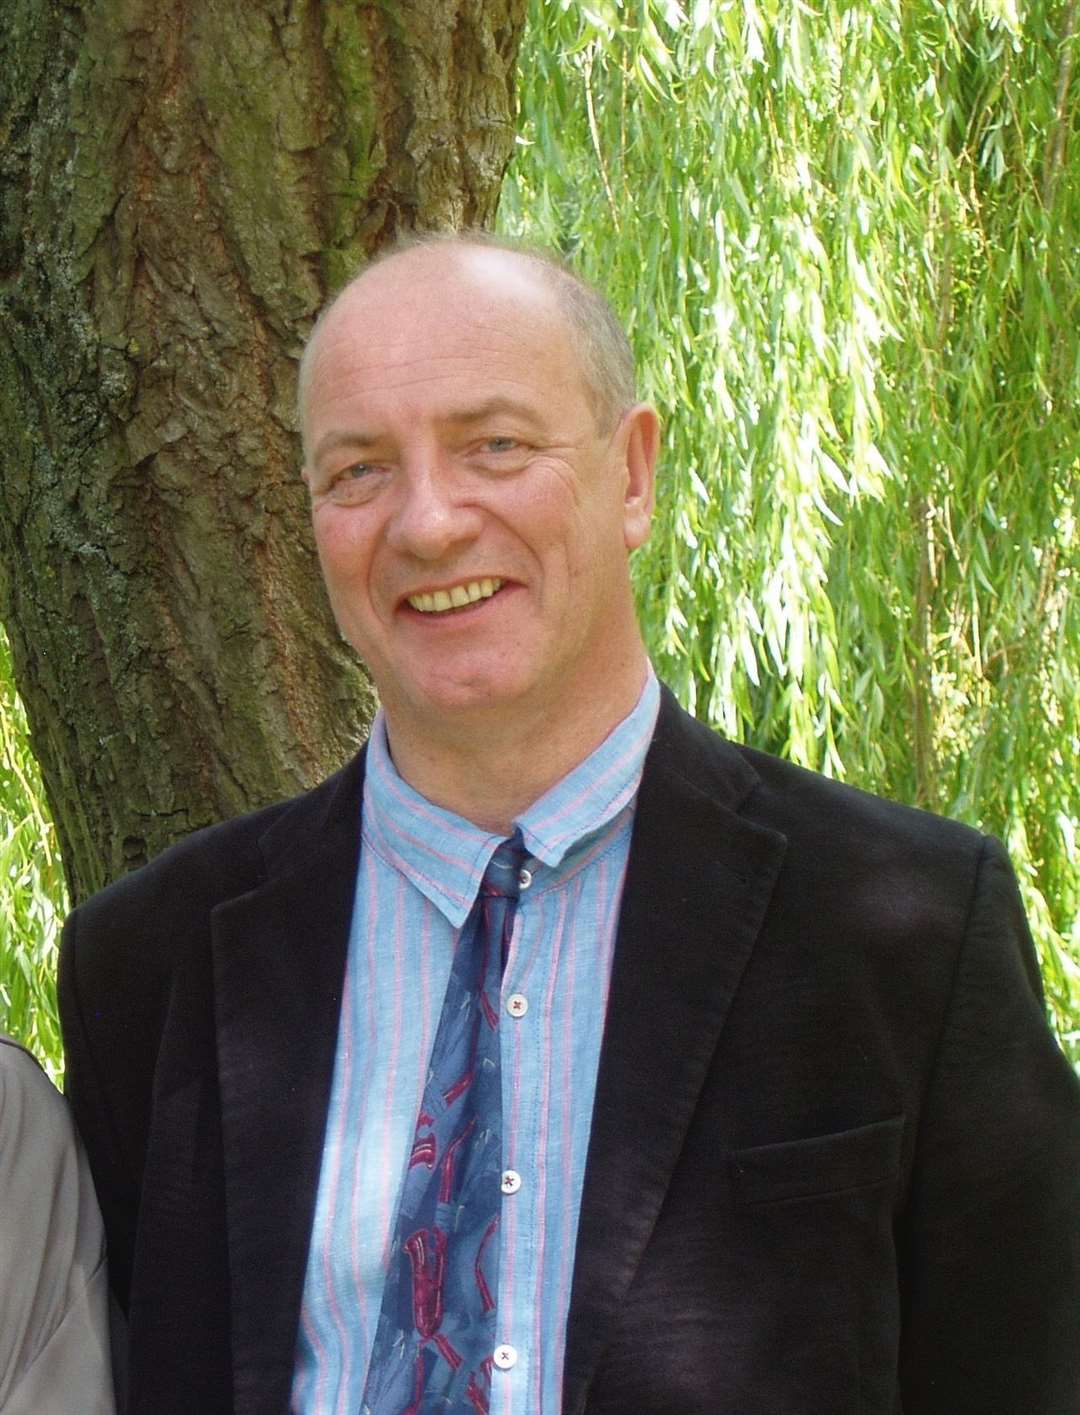 Steve Coombes, chair of Ramsgate Action Group (8146229)